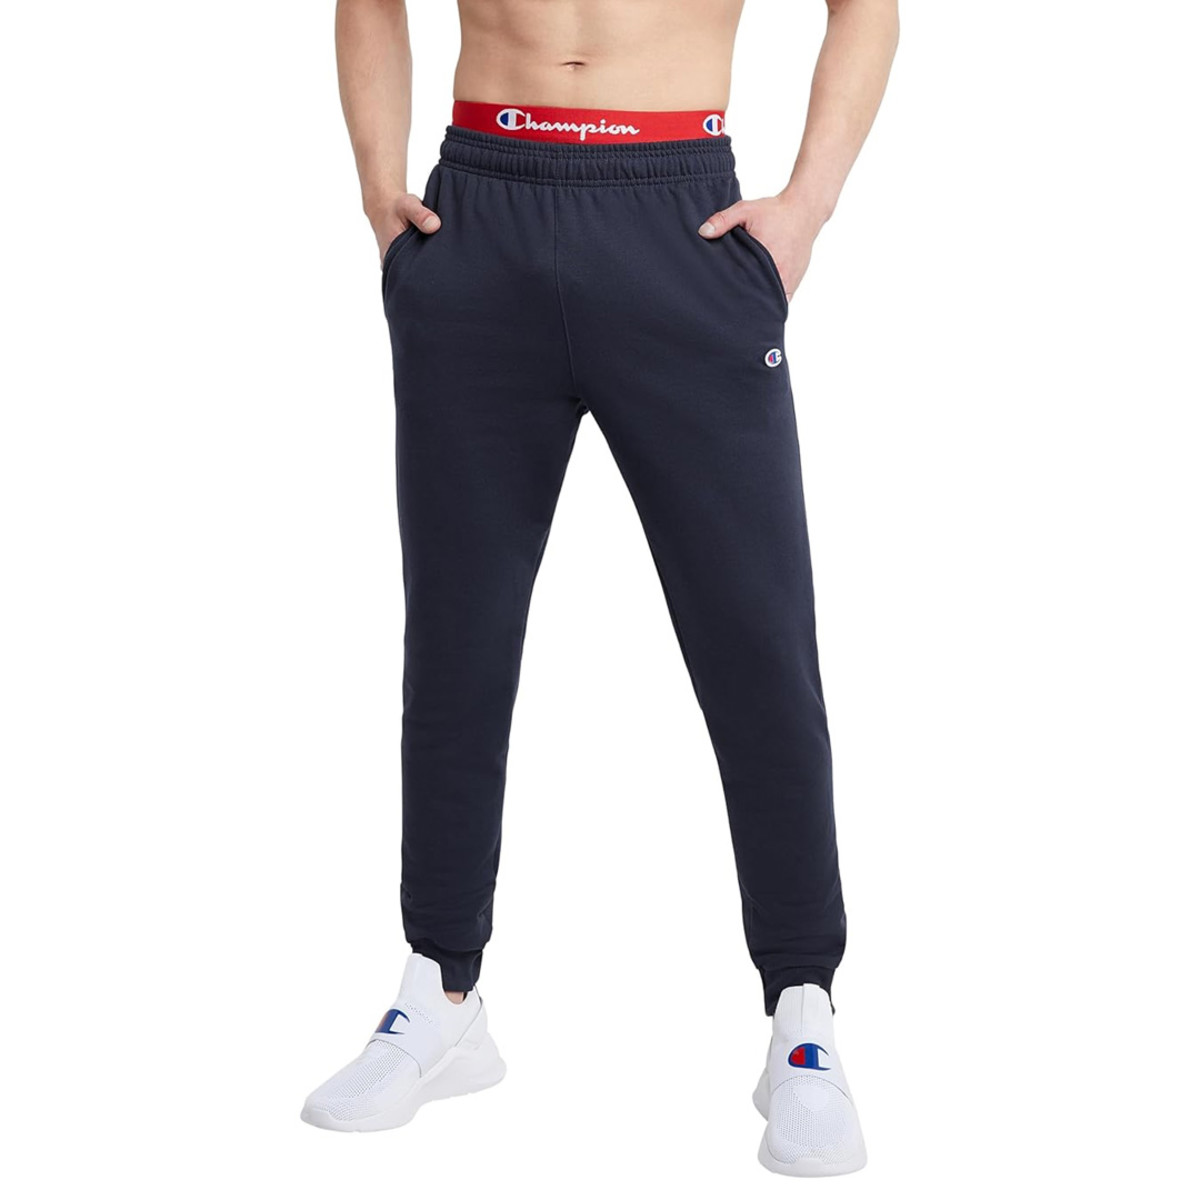 Champion's Powerblend Fleece Joggers Are Up to 55% Off - Men's Journal